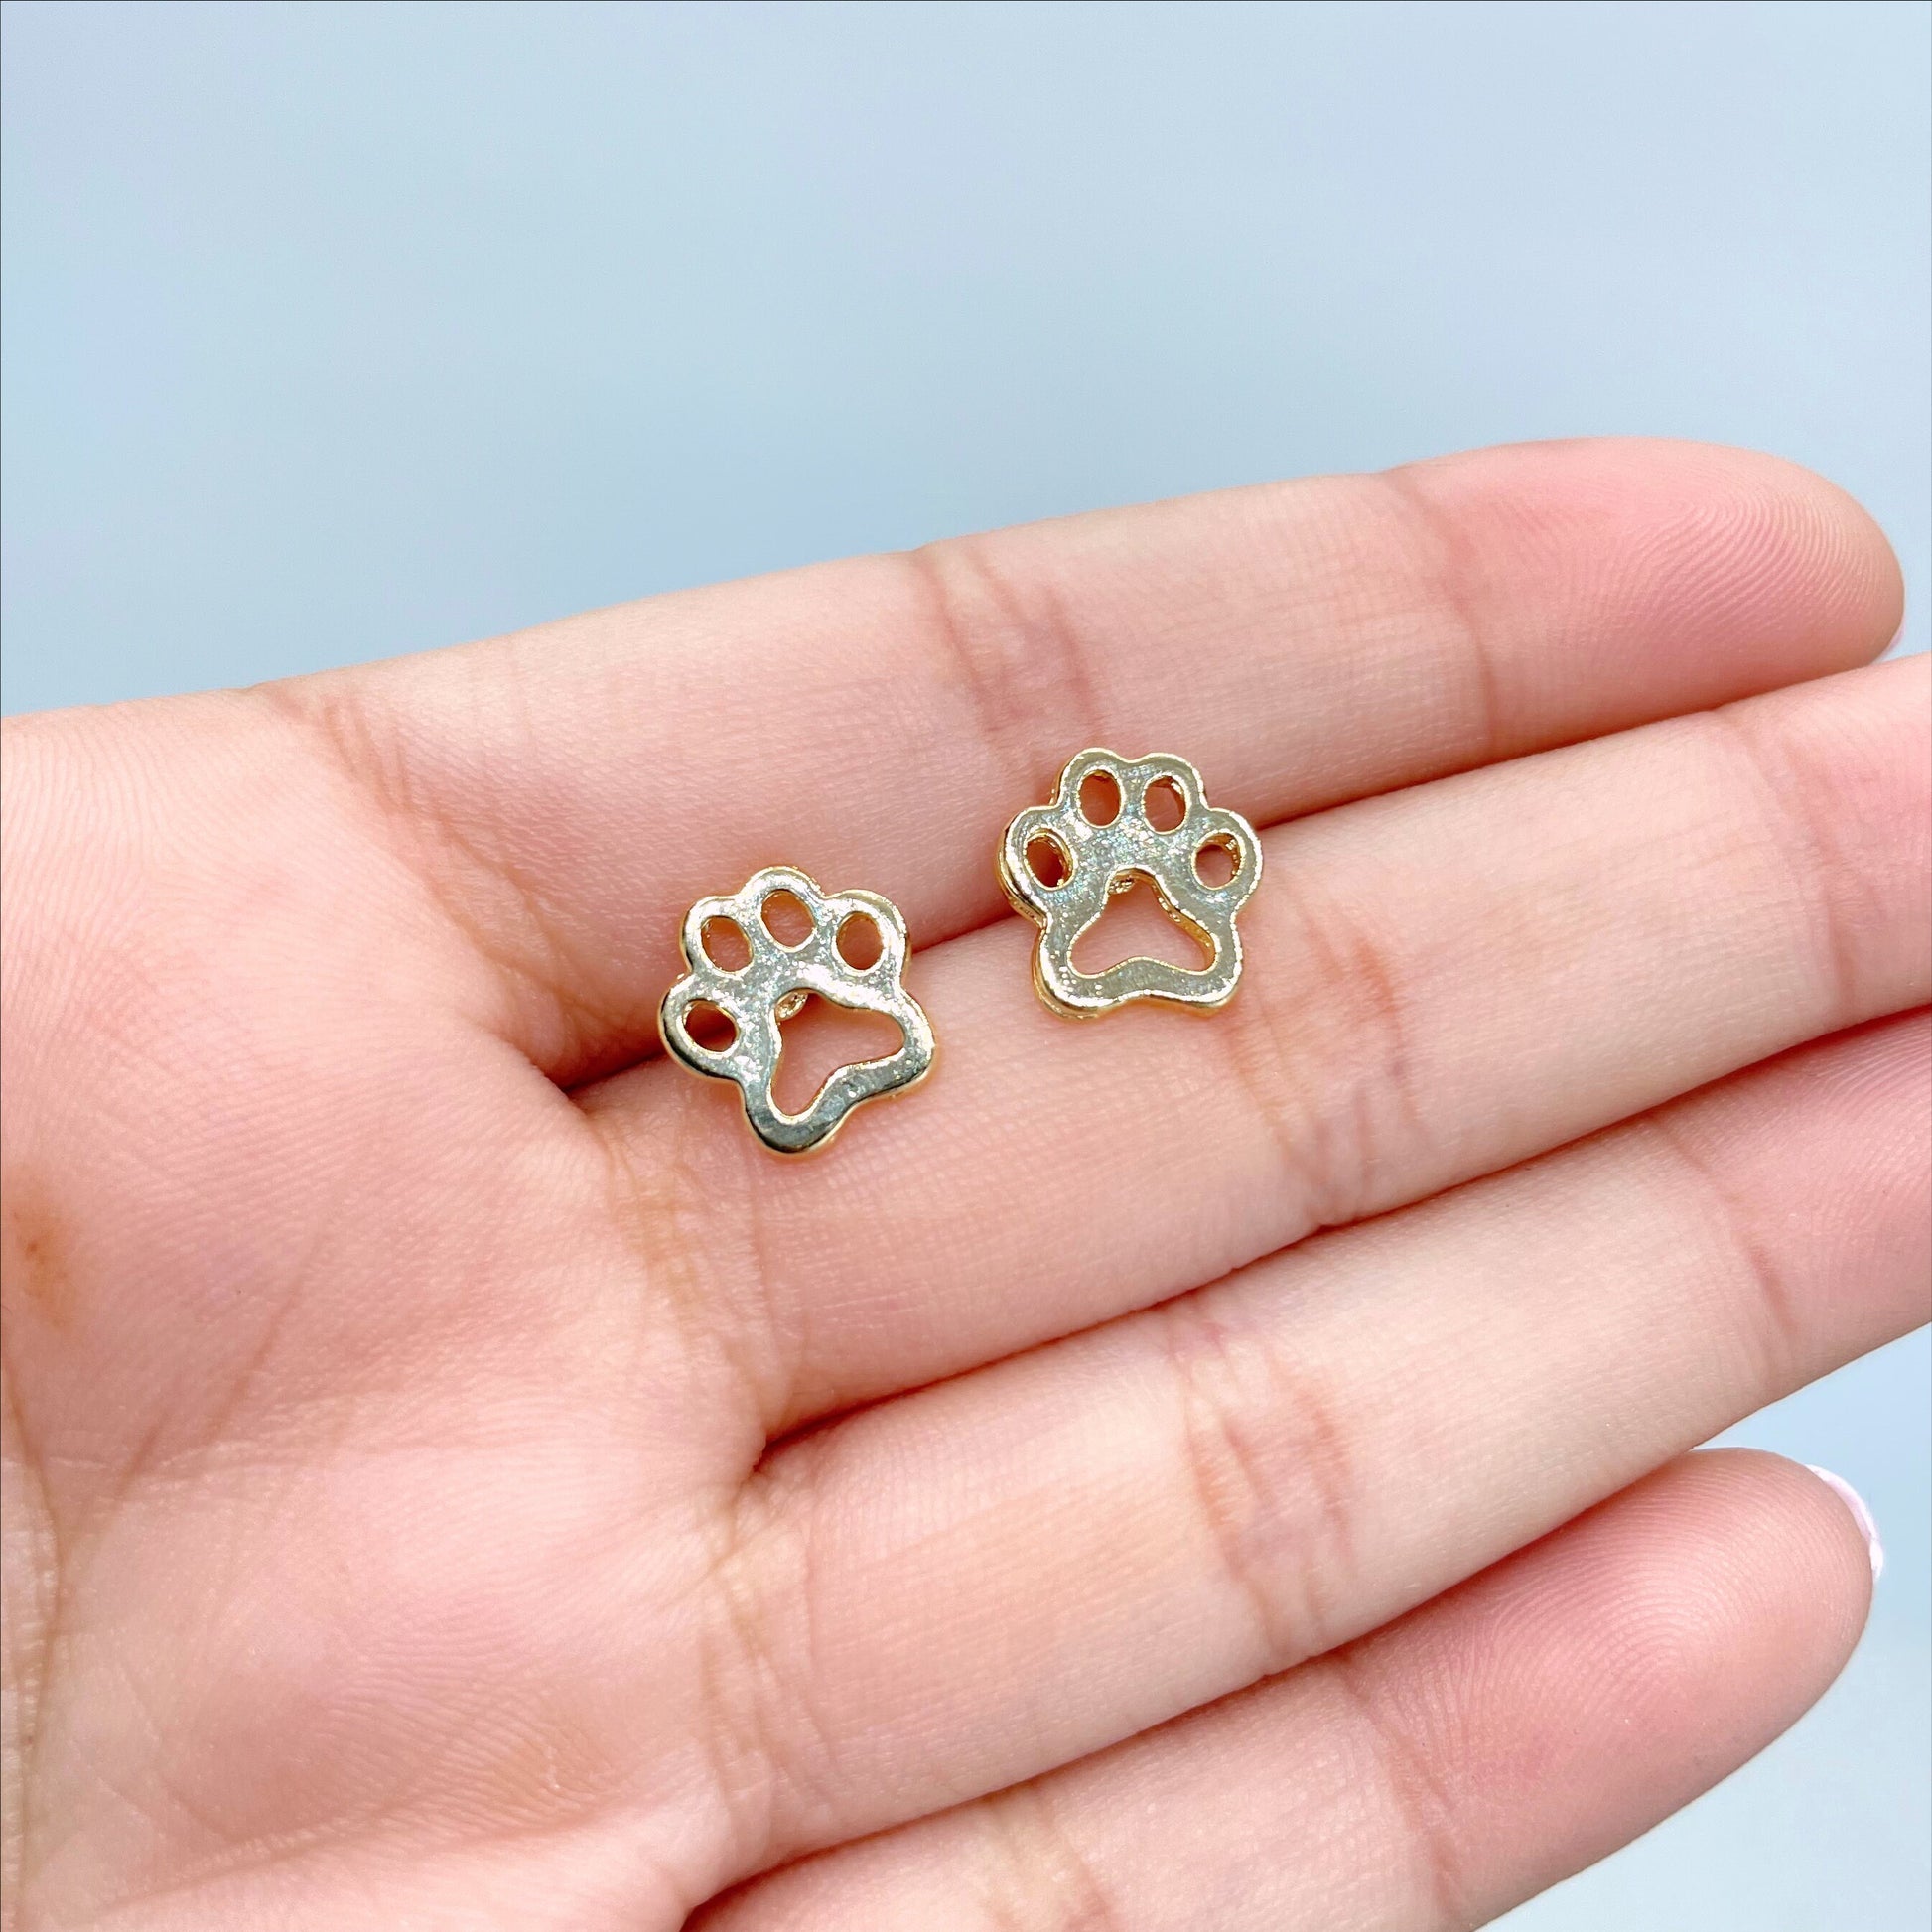 18k Gold Filled Deliciated Pet Fingerprint, Puppy Cat Paw, Heart-Shaped Cat Dog Paw Print Stud Earrings, Wholesale Jewelry Making Supplies